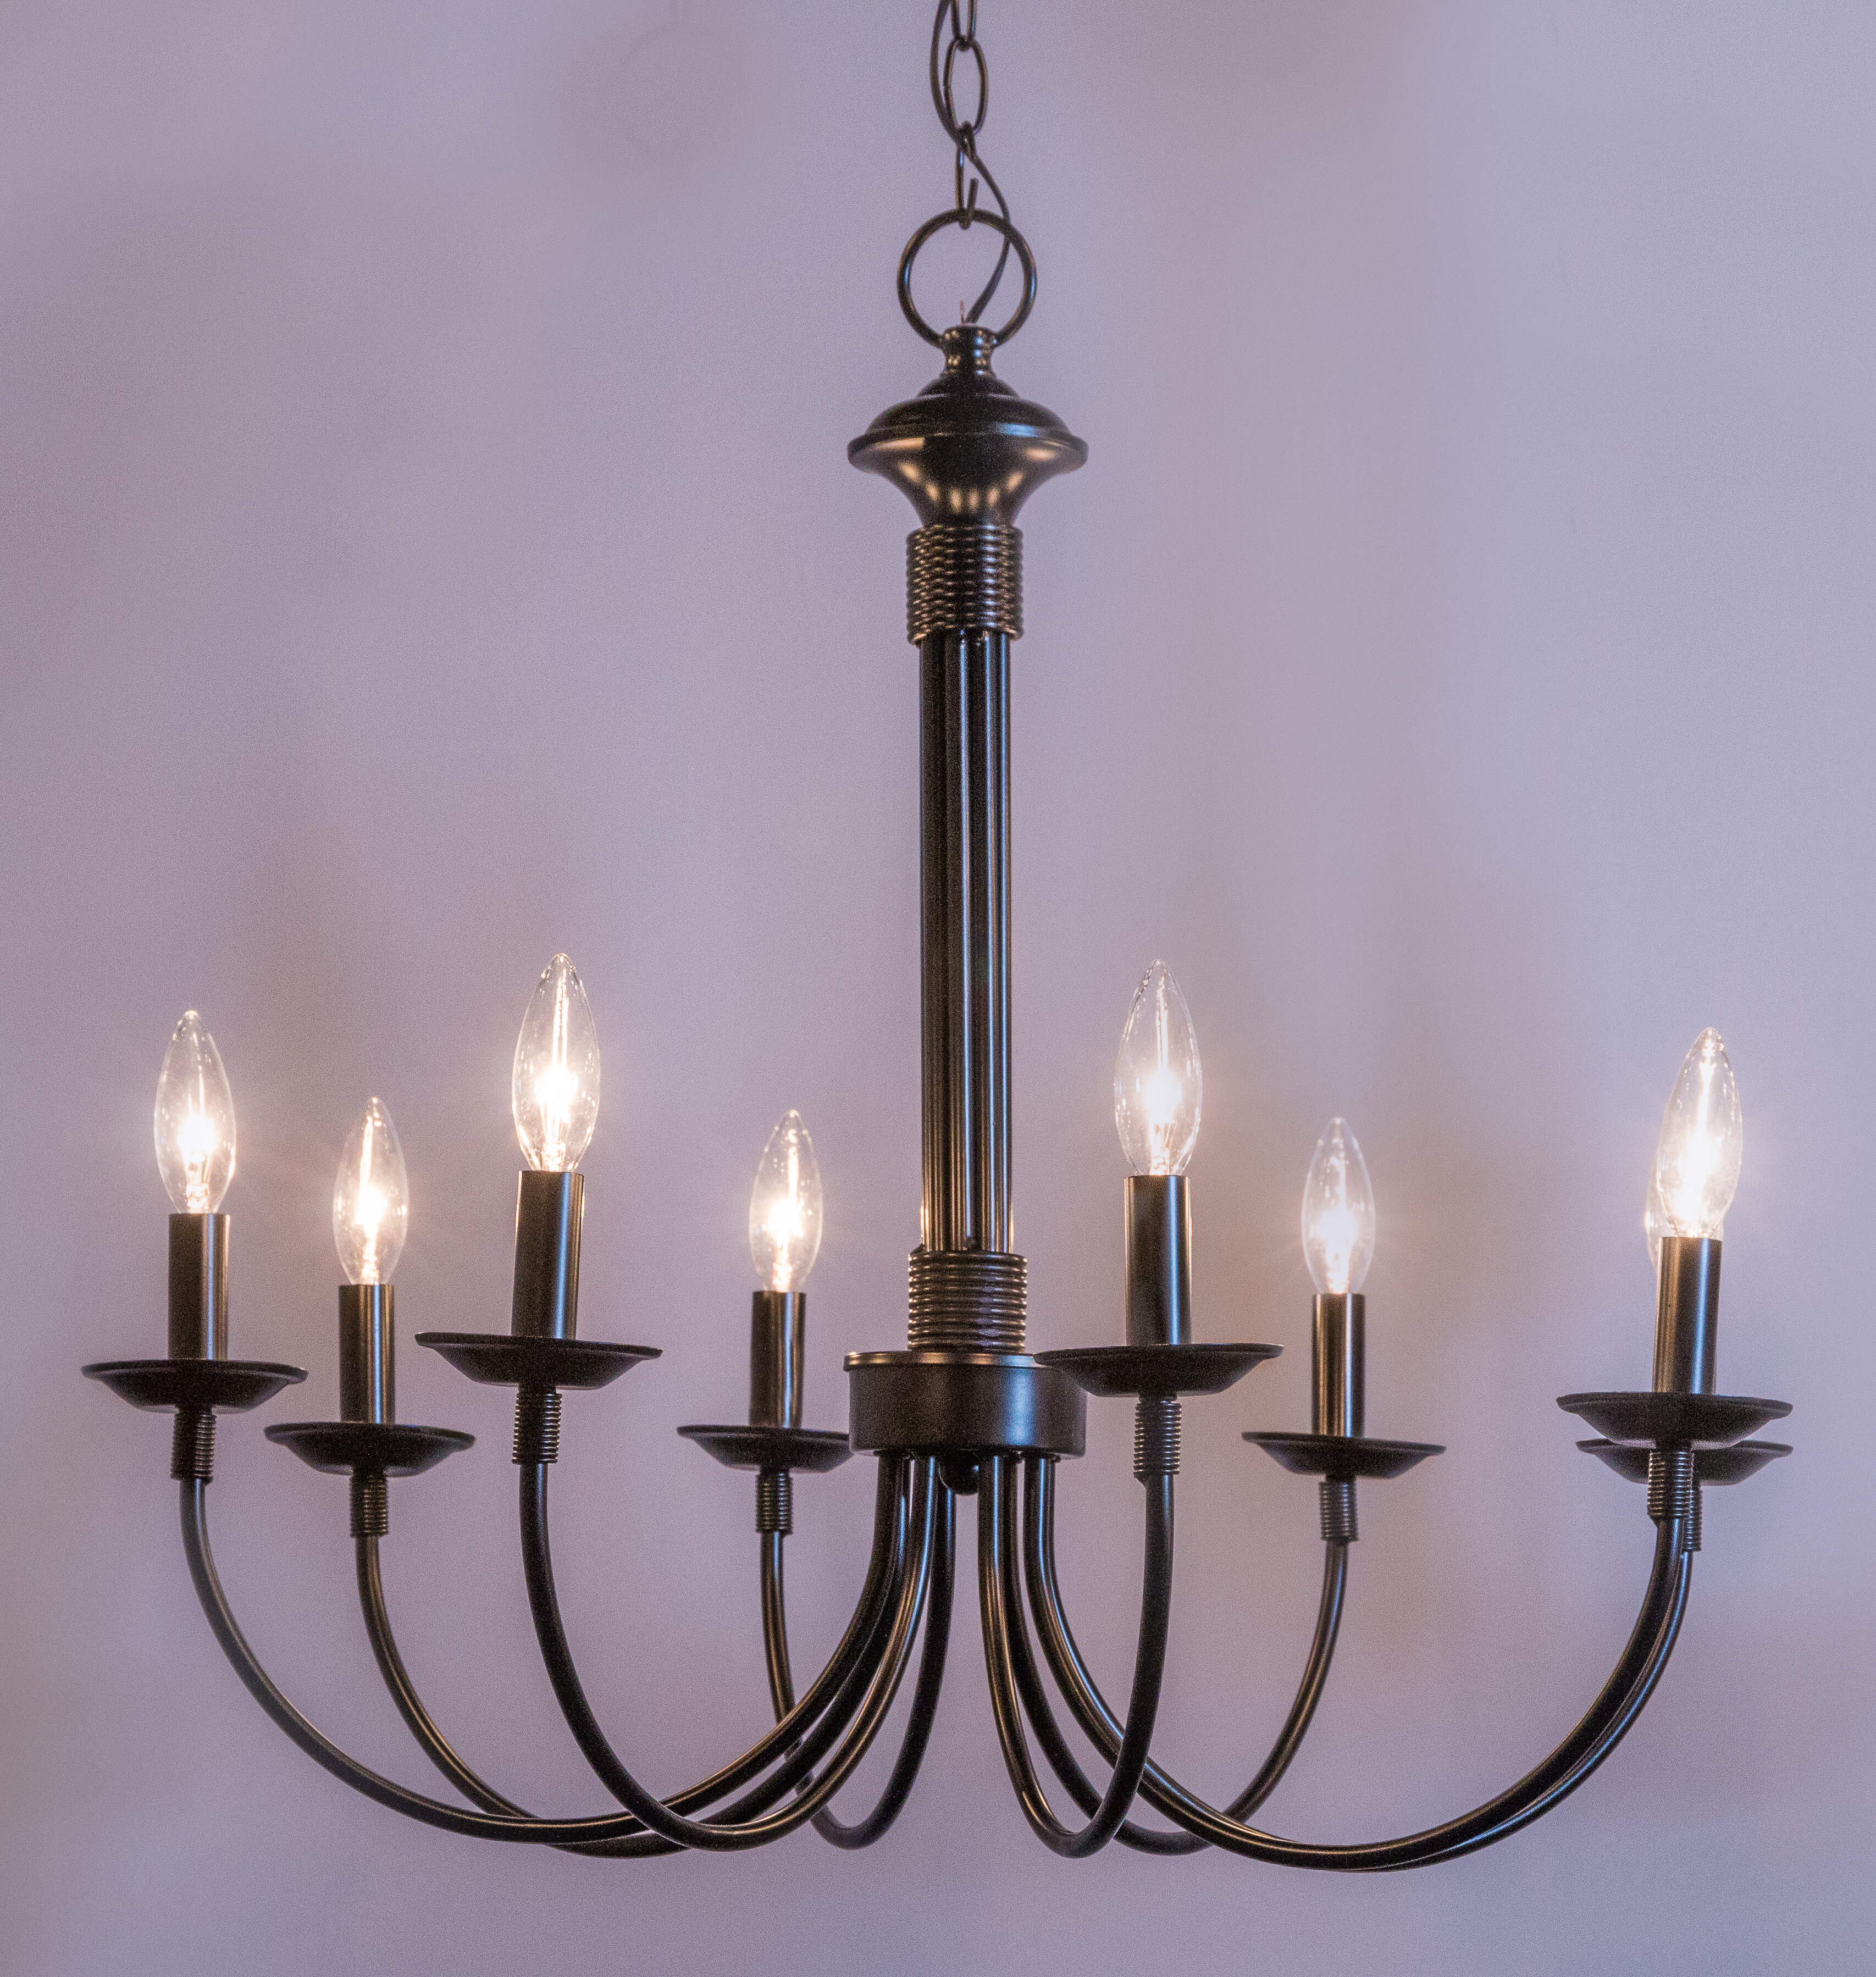 Laurel Foundry Modern Farmhouse Shaylee 8 Light Candle Style Chandelier